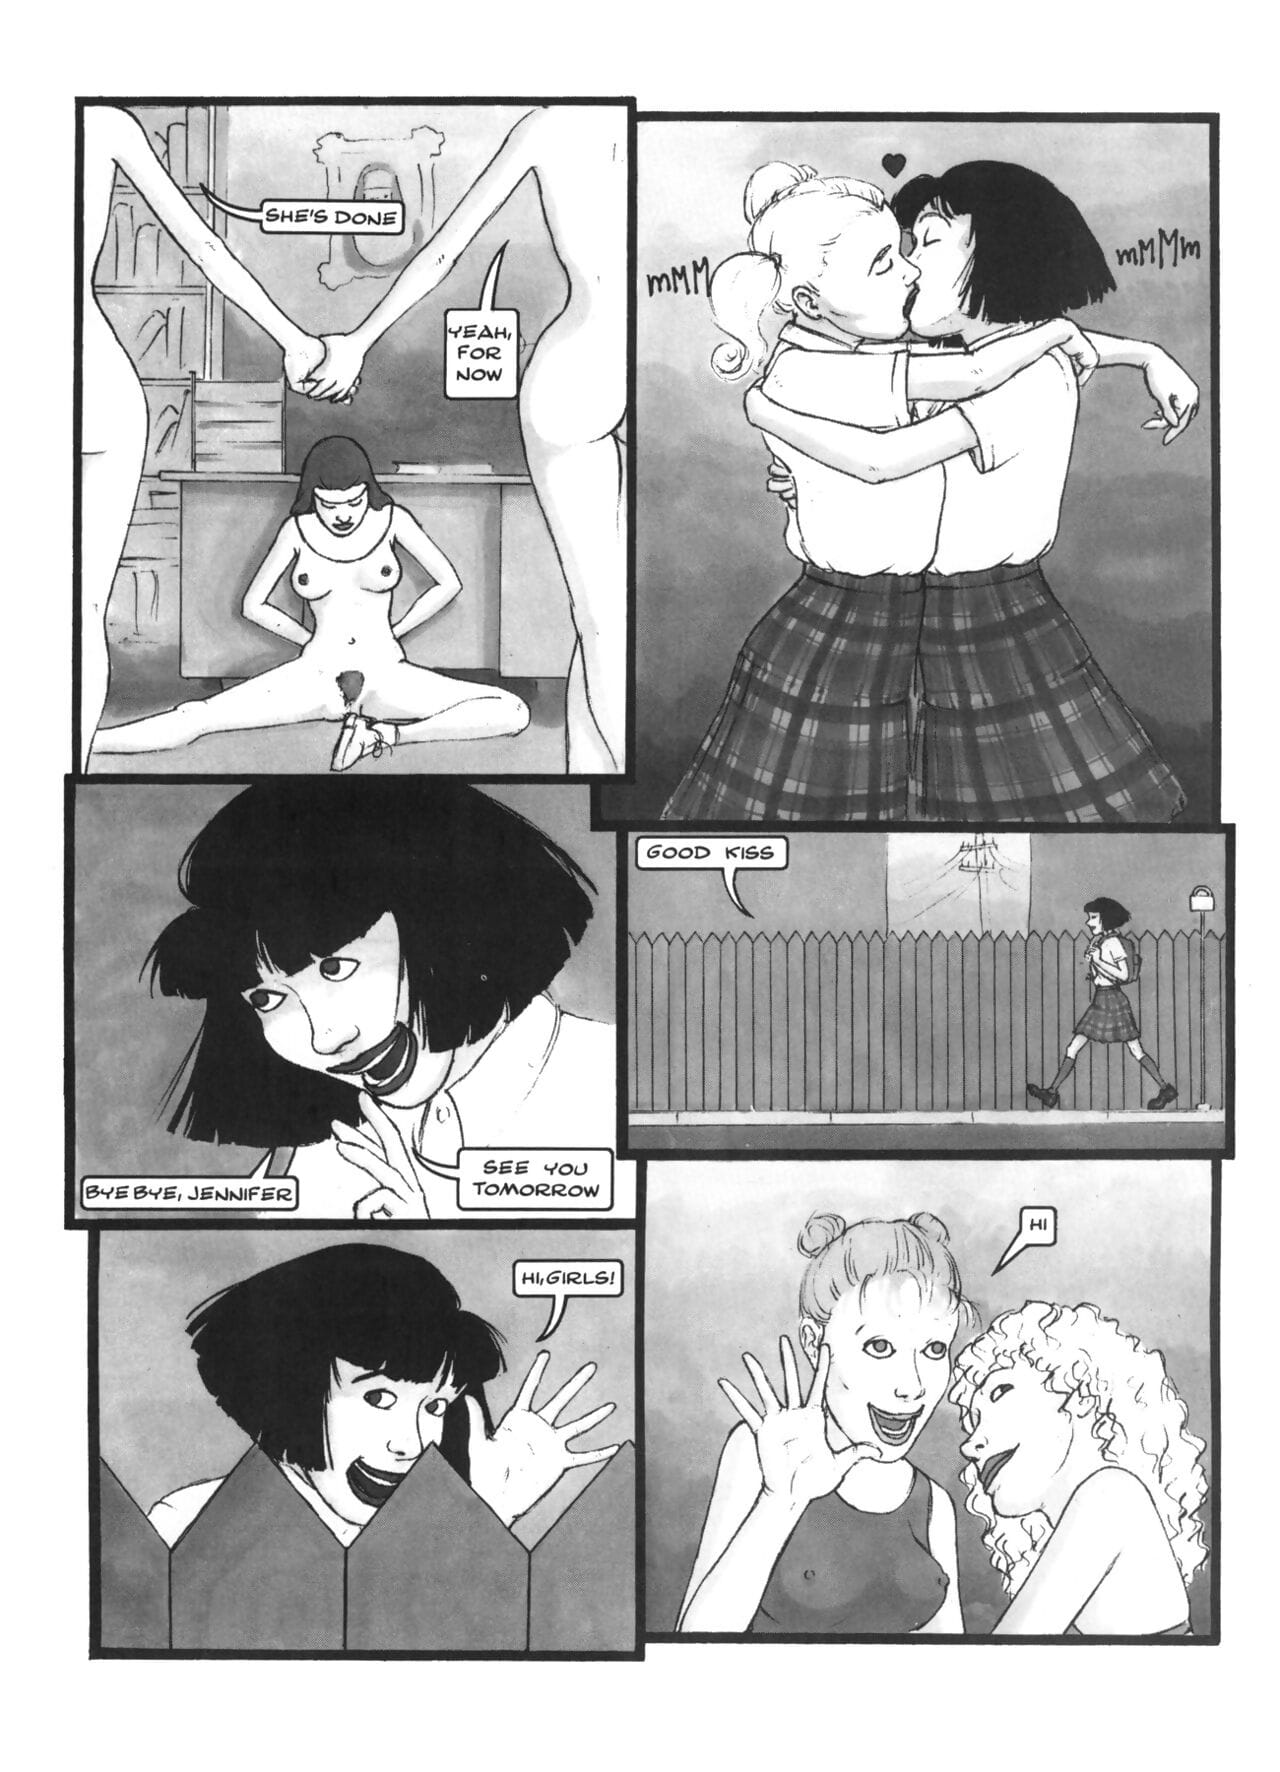 The Adventures of a Lesbian College High School Girl - part 2 page 1